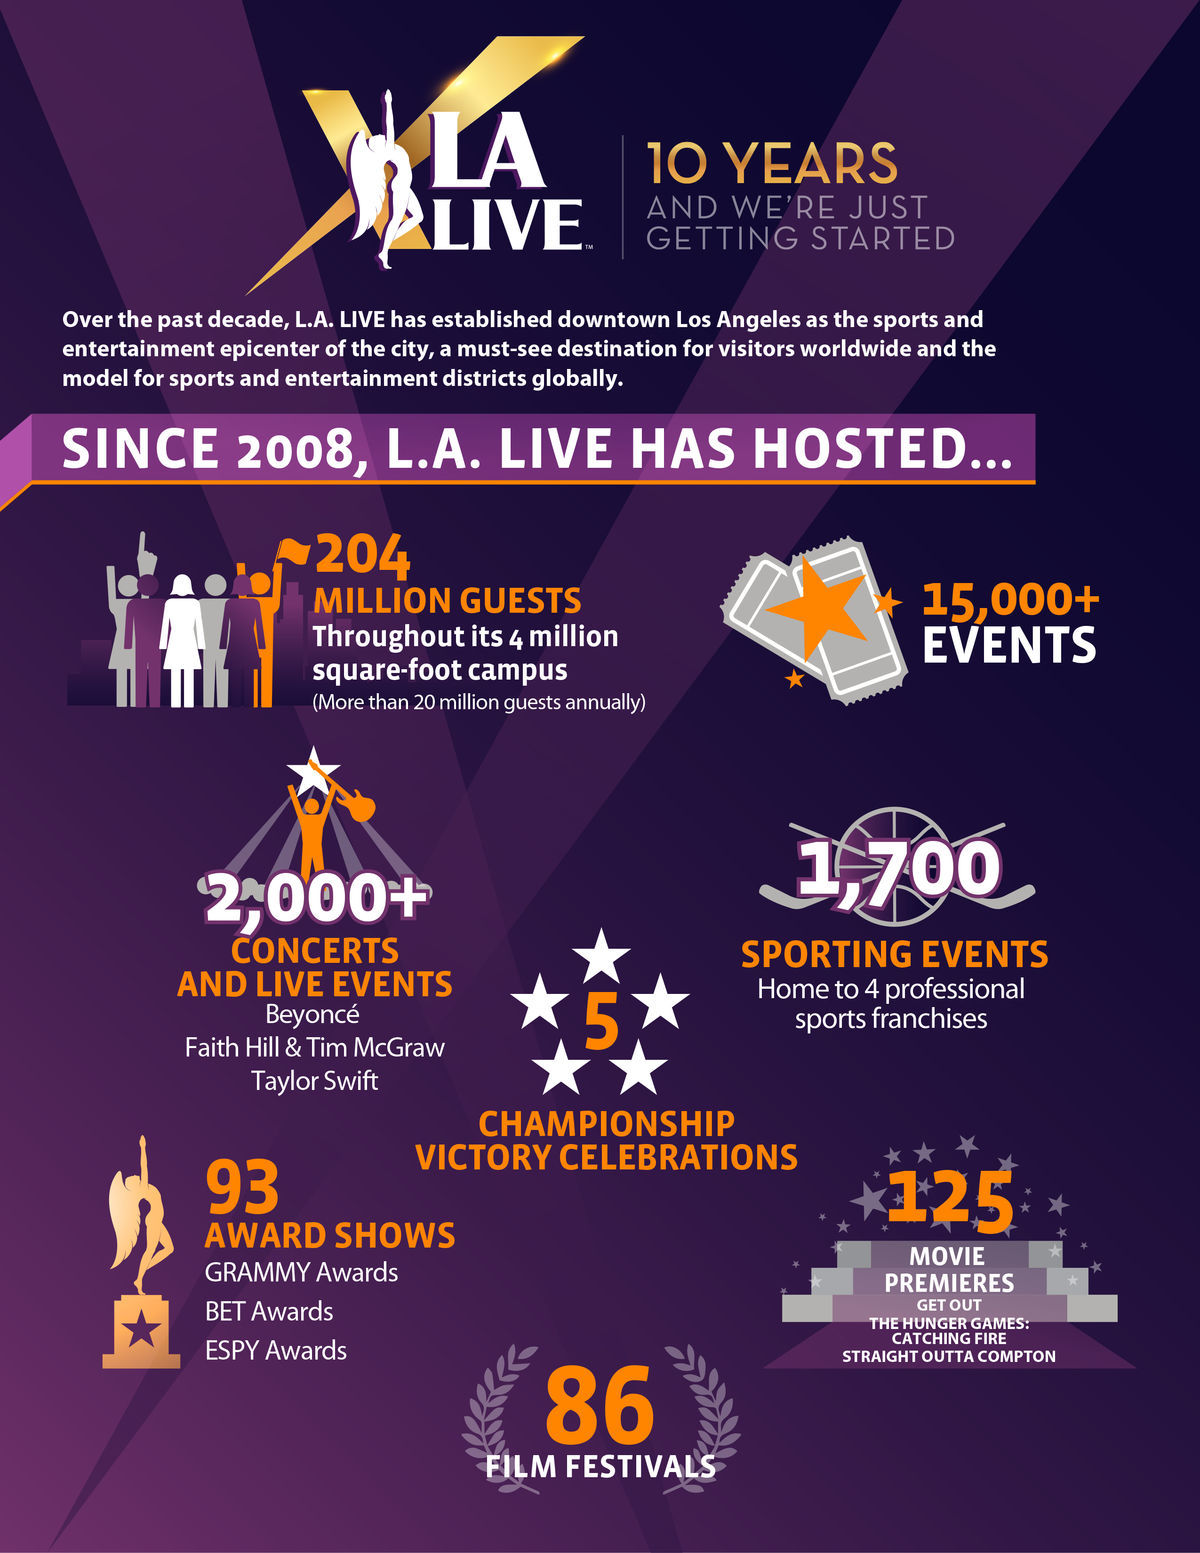 Downtown Los Angeles' world-renowned entertainment district L.A. LIVE celebrates its 10th anniversary on June 8, 2018. (Graphic: Business Wire)